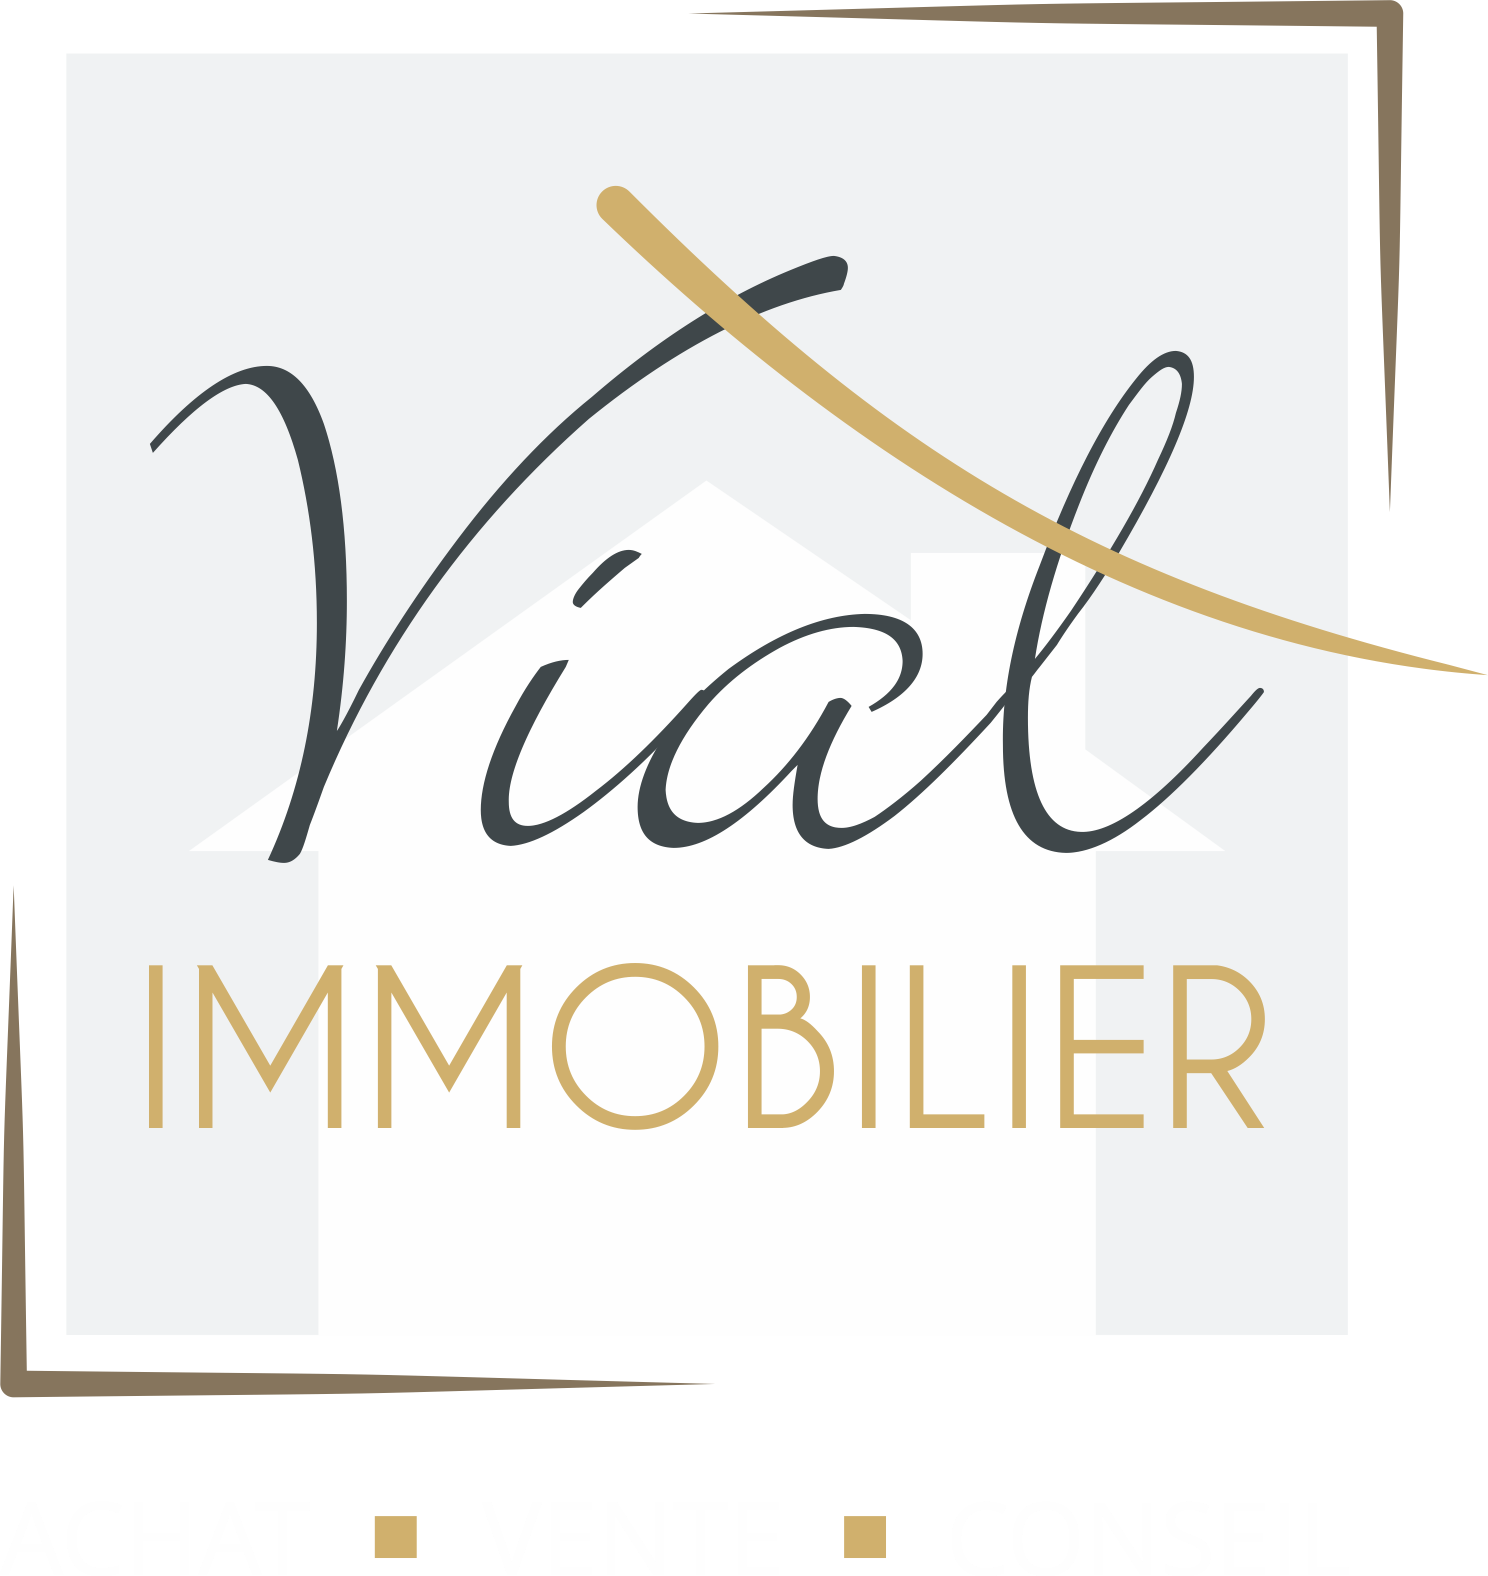 Vial Immobilier